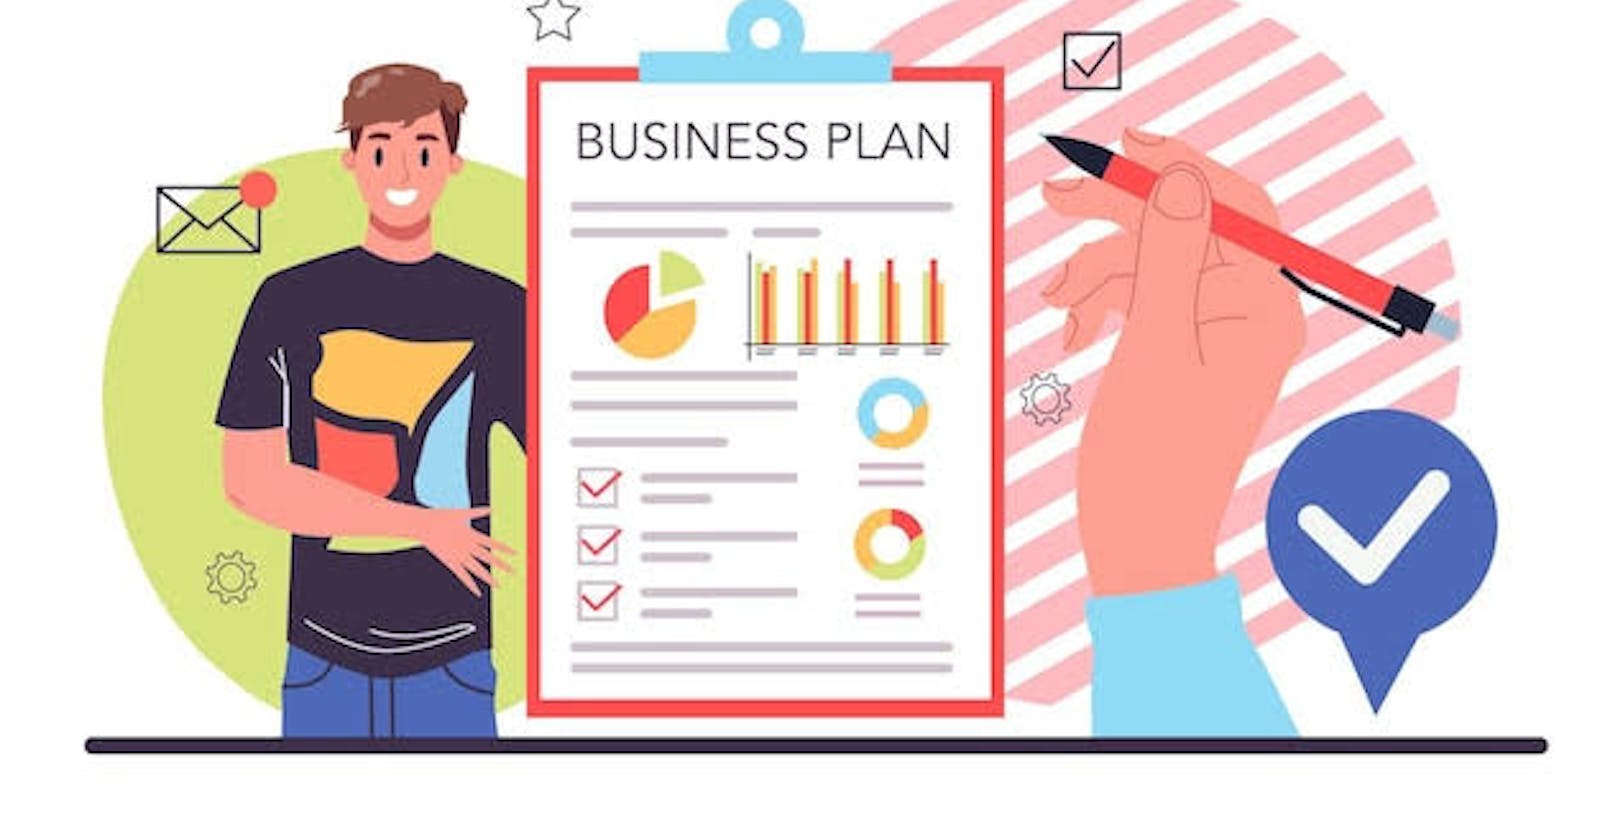 Crafting a Winning Businеss Plan: Your Roadmap to Sеcuring Funding